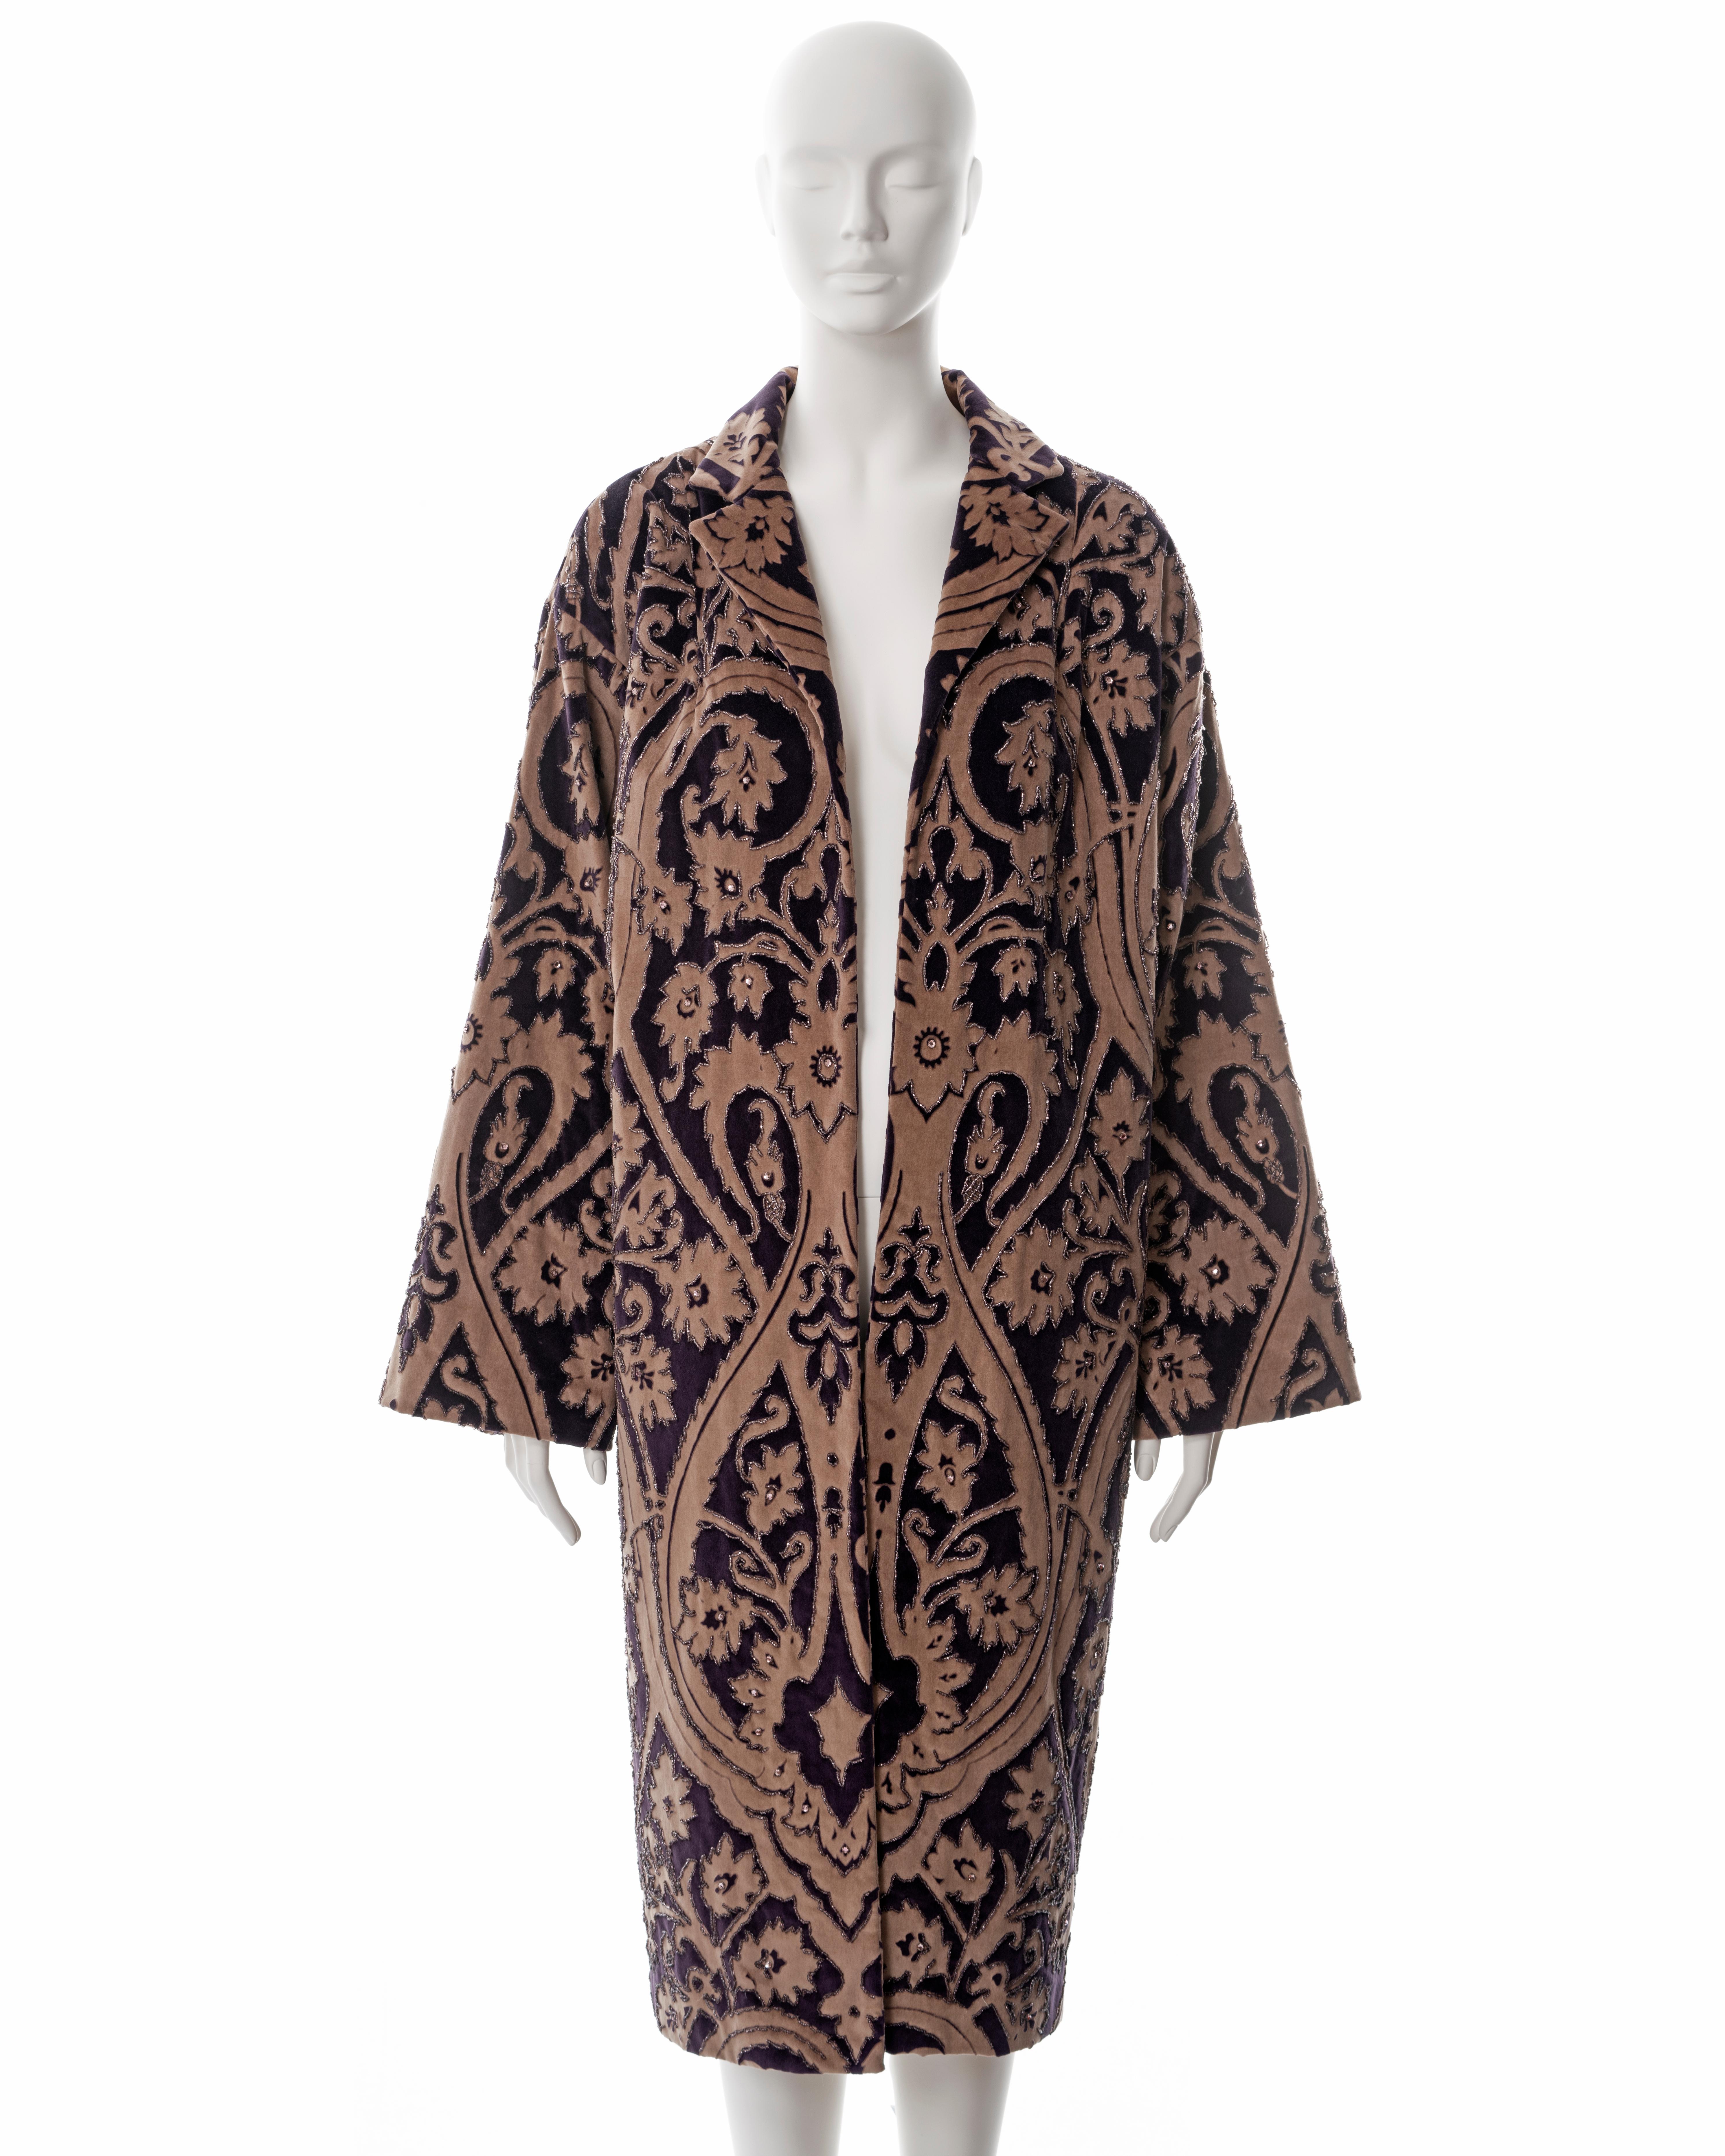 ▪ Dolce & Gabbana velvet evening coat
▪ Sold by One of a Kind Archive
▪ Fall-Winter 1998
▪ Constructed from cotton velvet in a mauve and tan brocade print 
▪ Beaded with crystals and bugle-beads
▪ Wide cut sleeves 
▪ Open front 
▪ IT 40 - FR 36 - UK